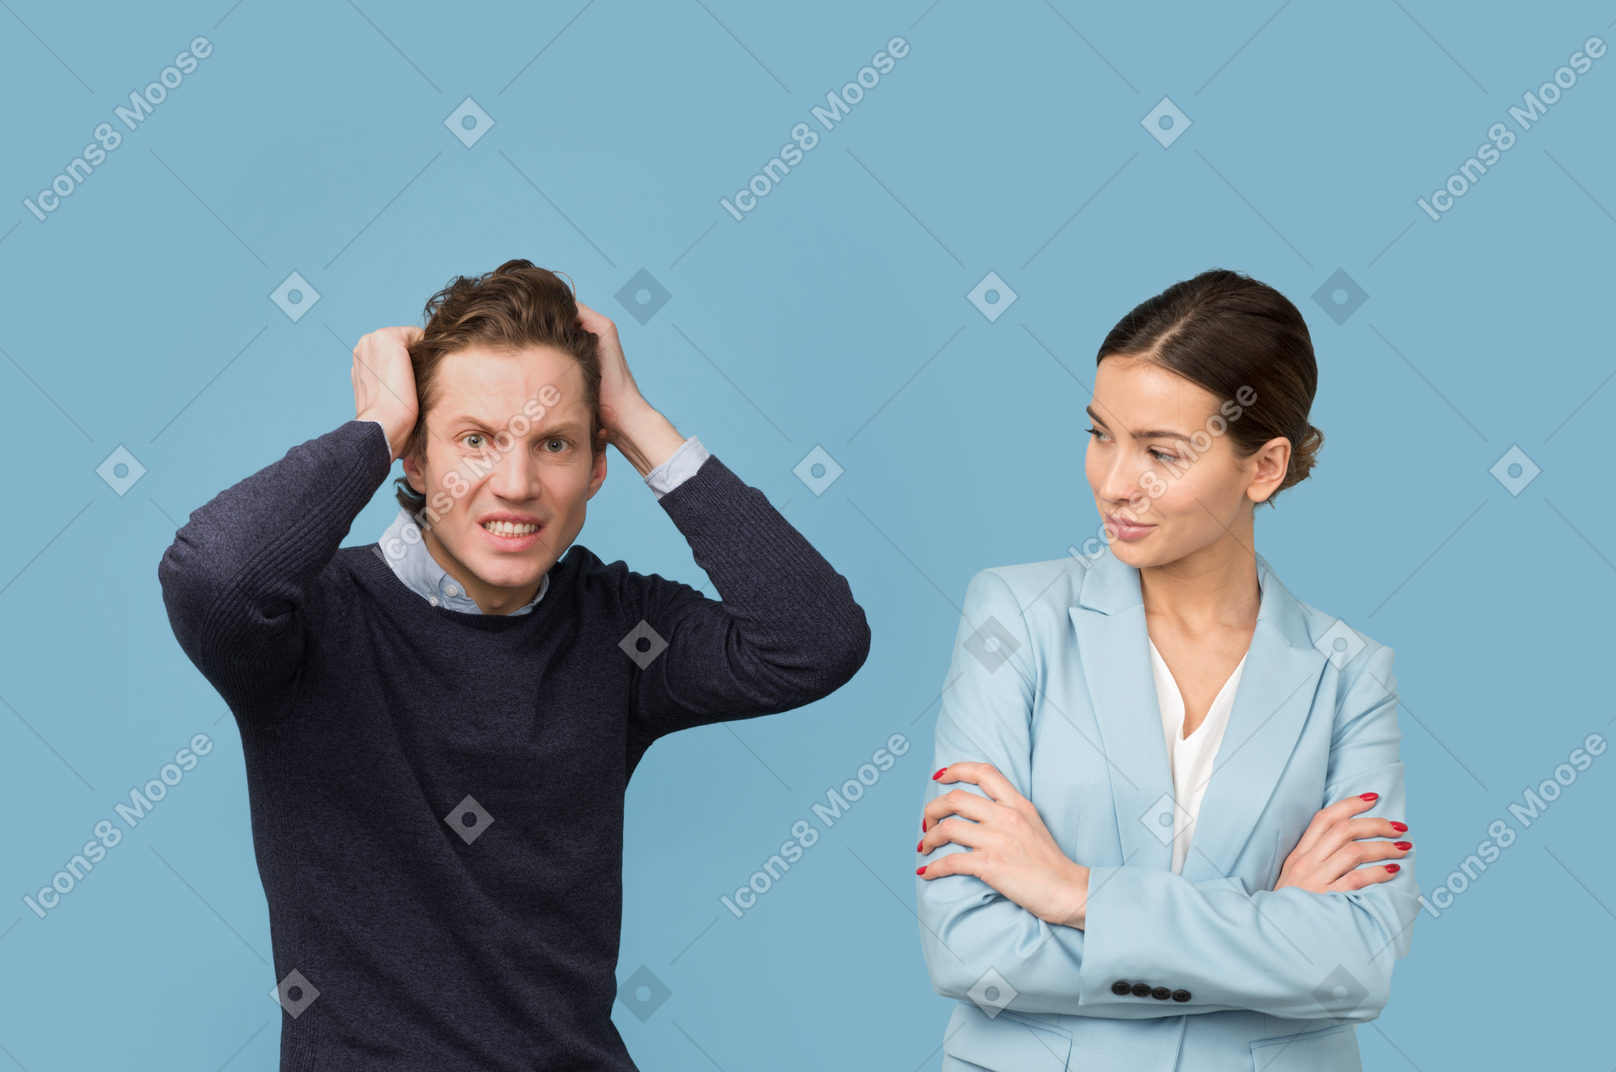 Annoyed young man unable to hide his feelings